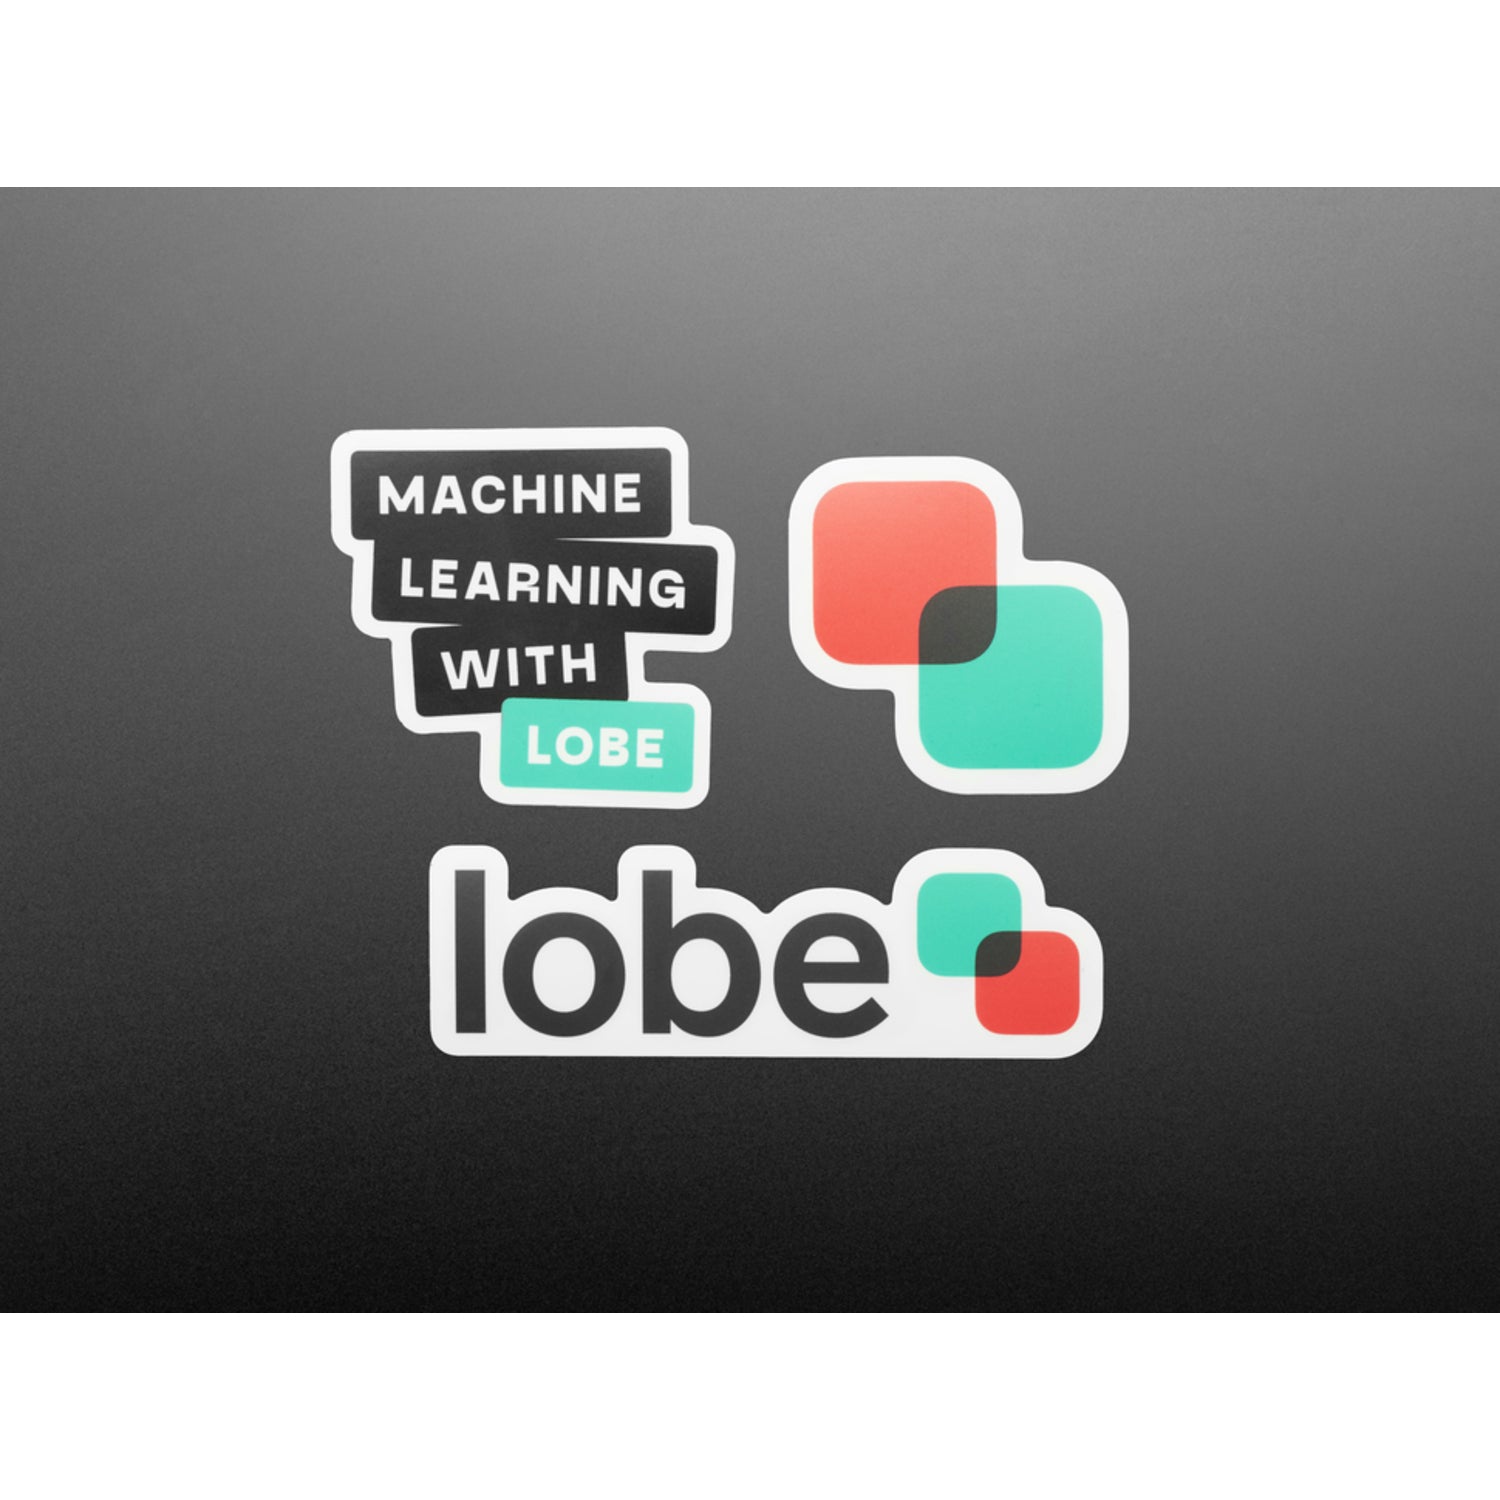 Microsoft Machine Learning Kit for Lobe - Pi 4 Not Included